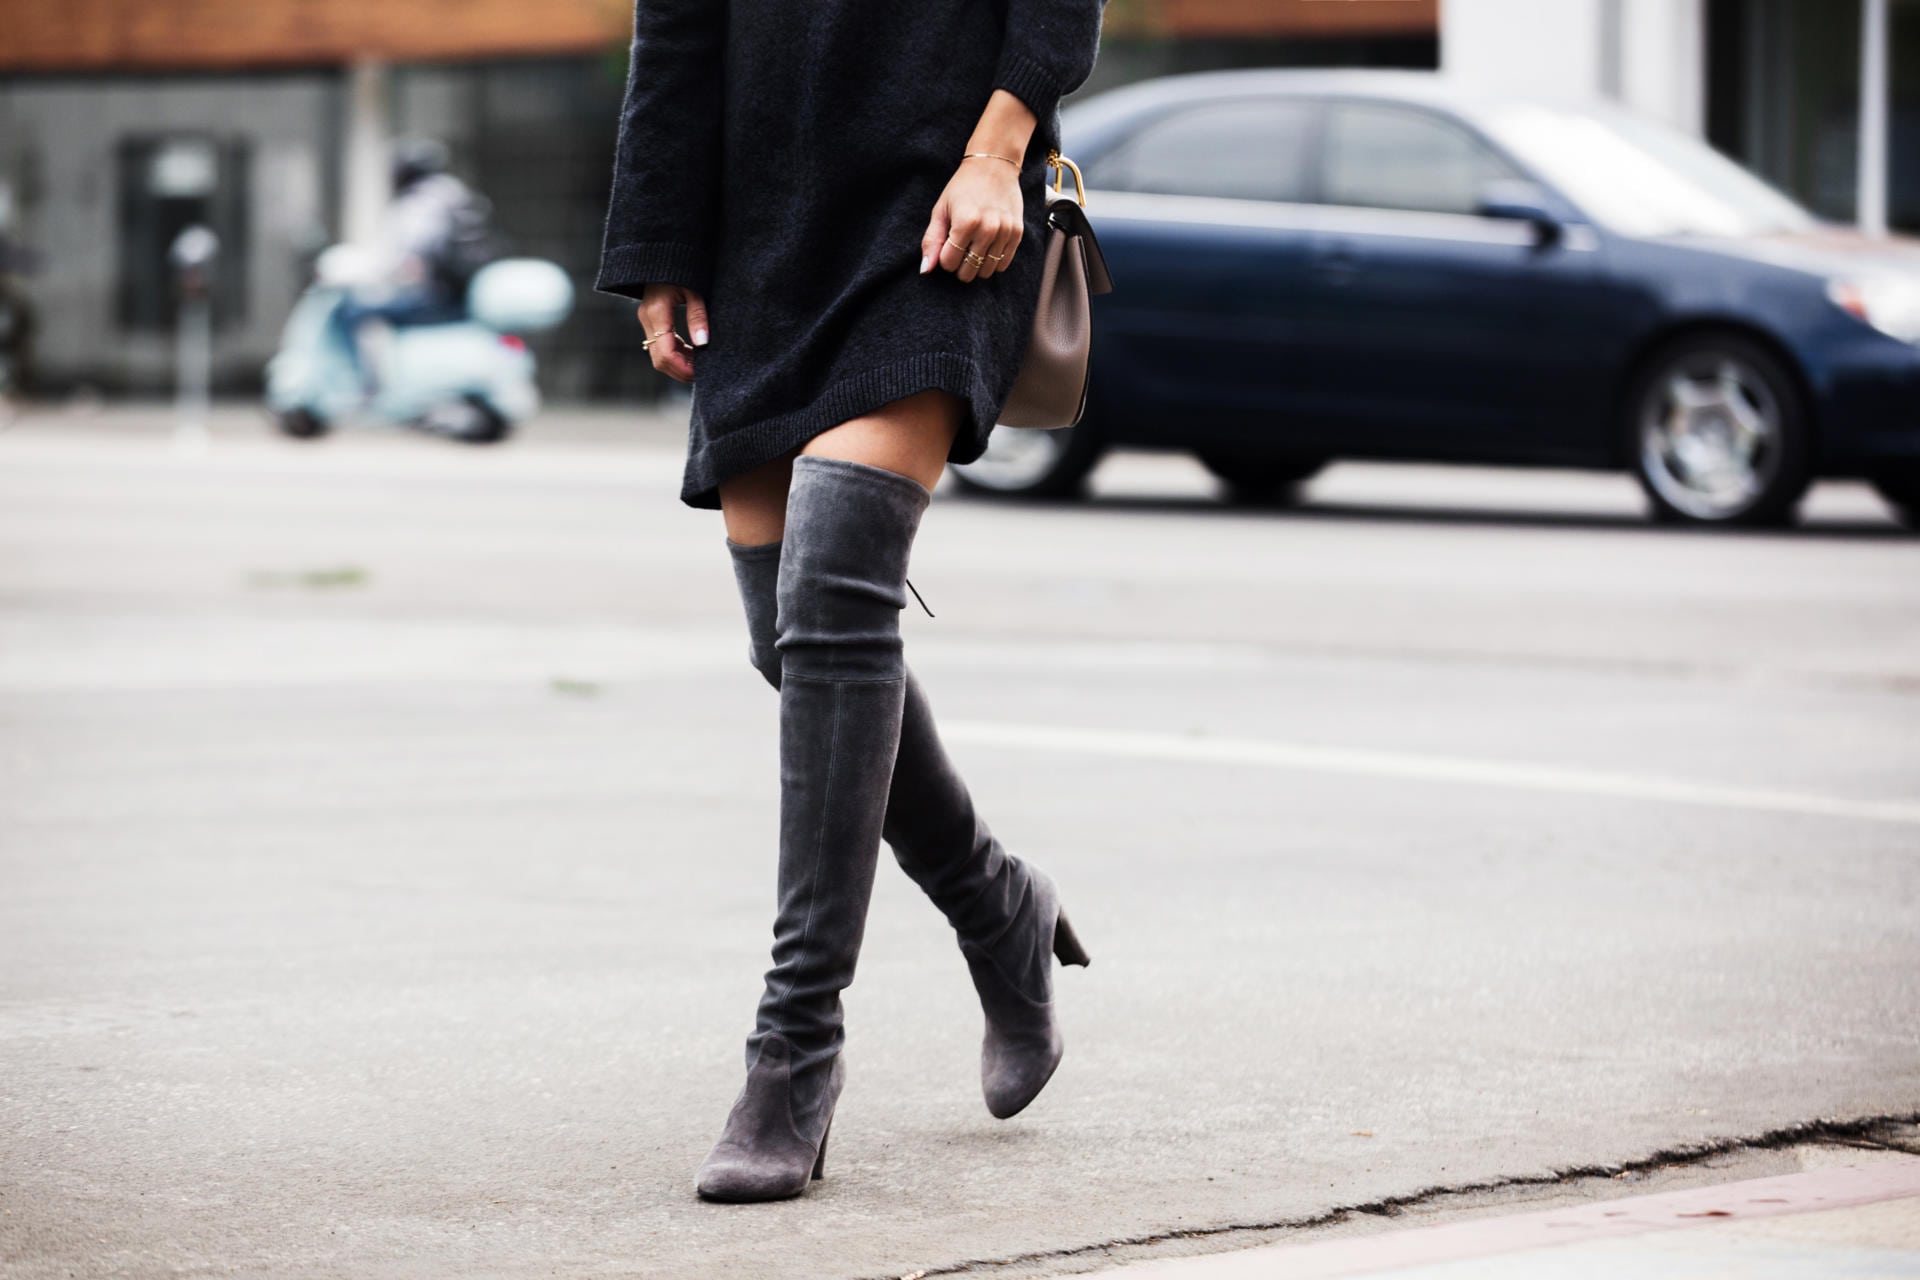 Thanksgiving outfit idea, sweater dress, over-the-knee boots | The Girl From Panama